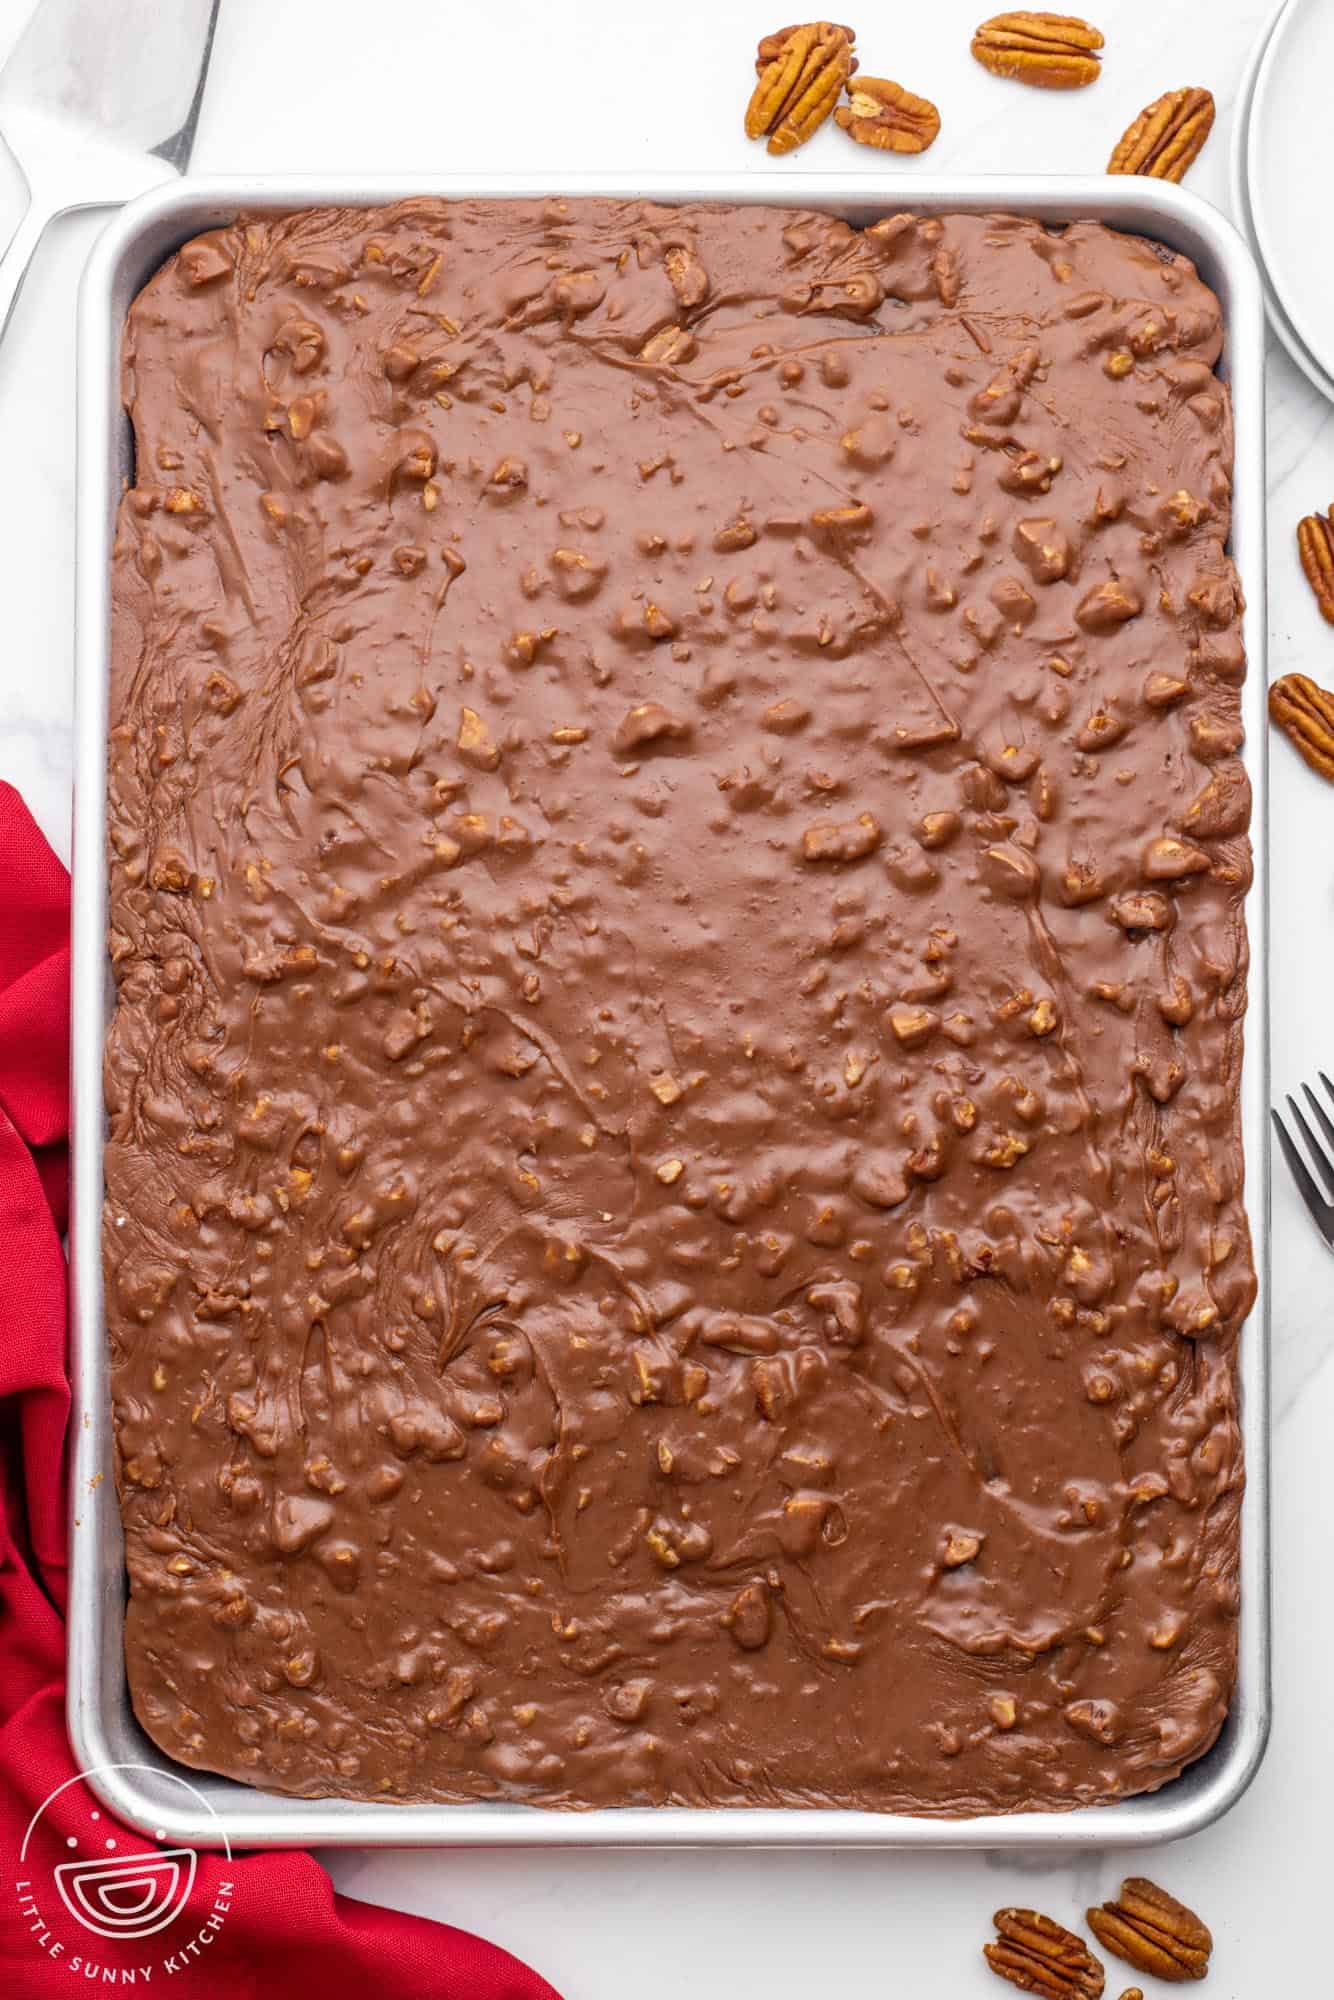 A large texas sheet cake with pecan chocolate frosting.